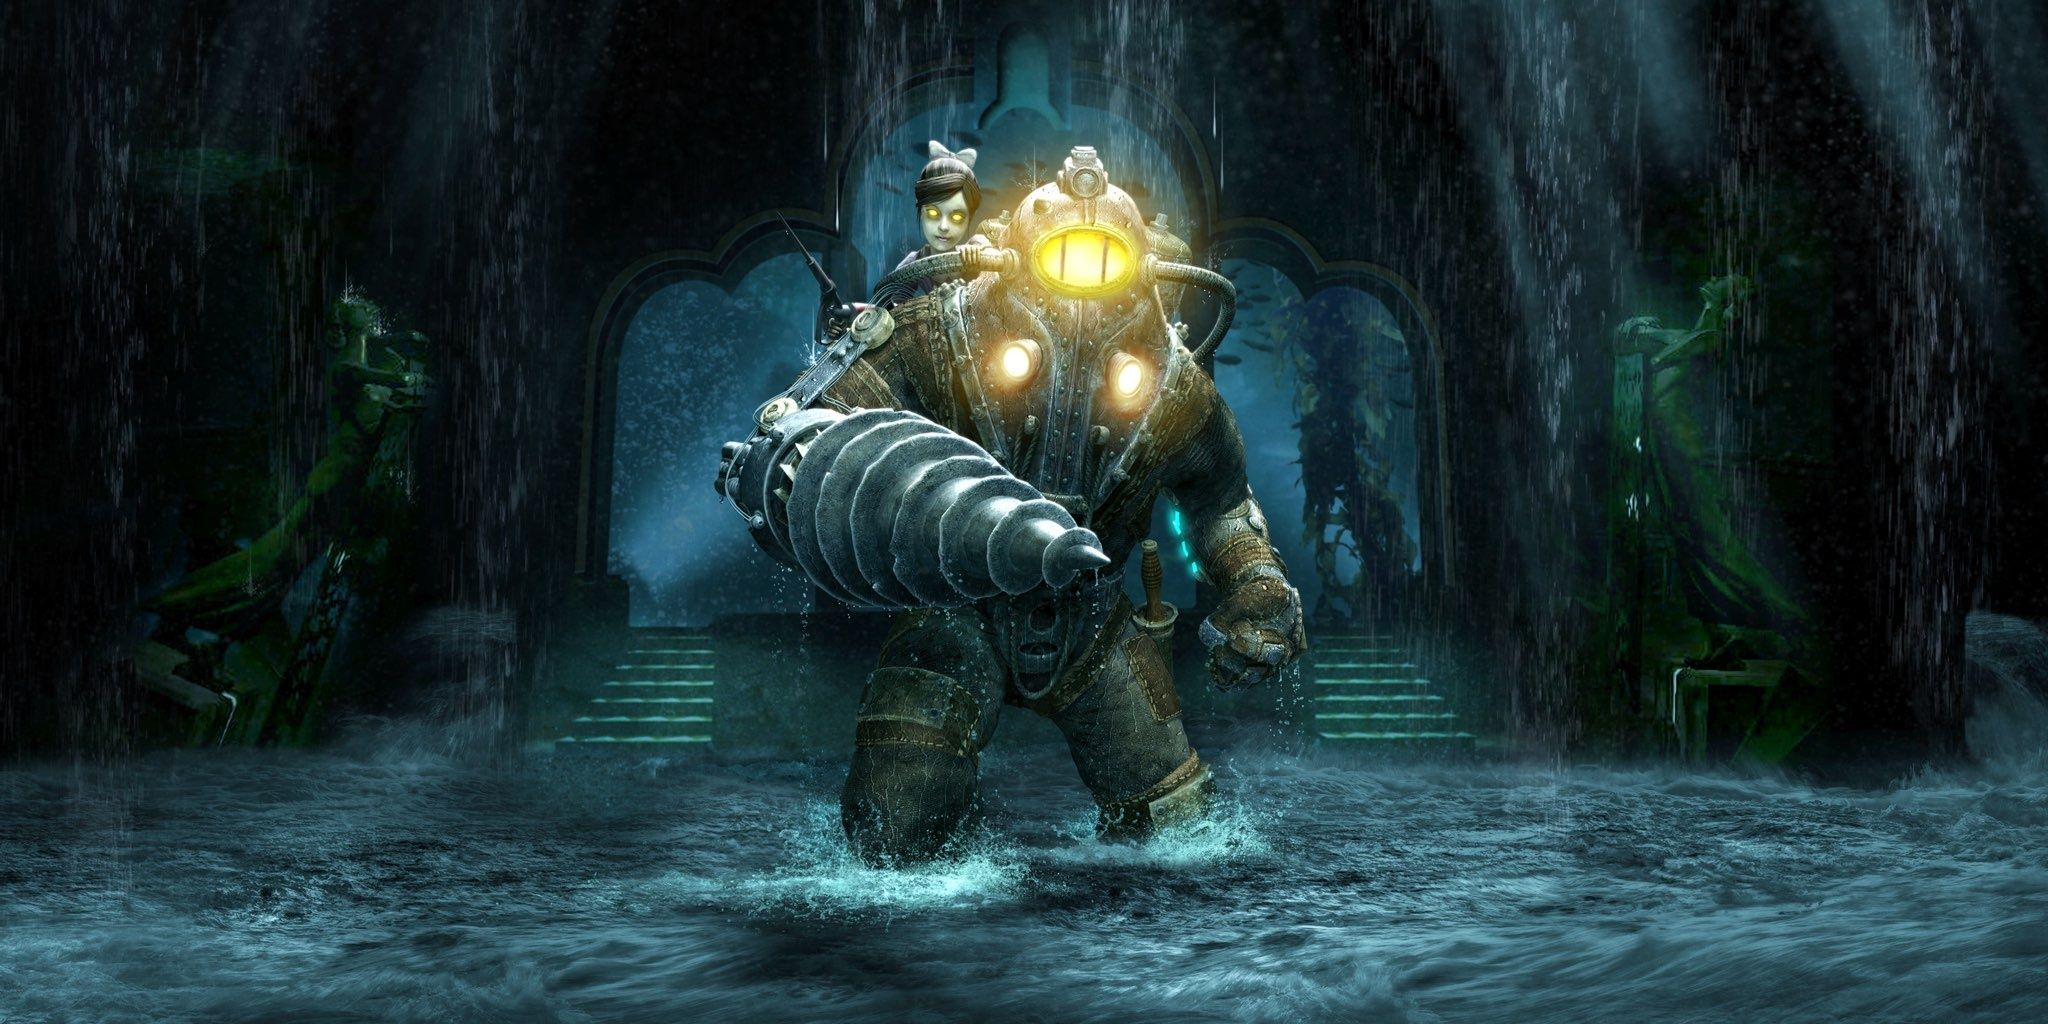 A photo showing cover art for Bioshock 2